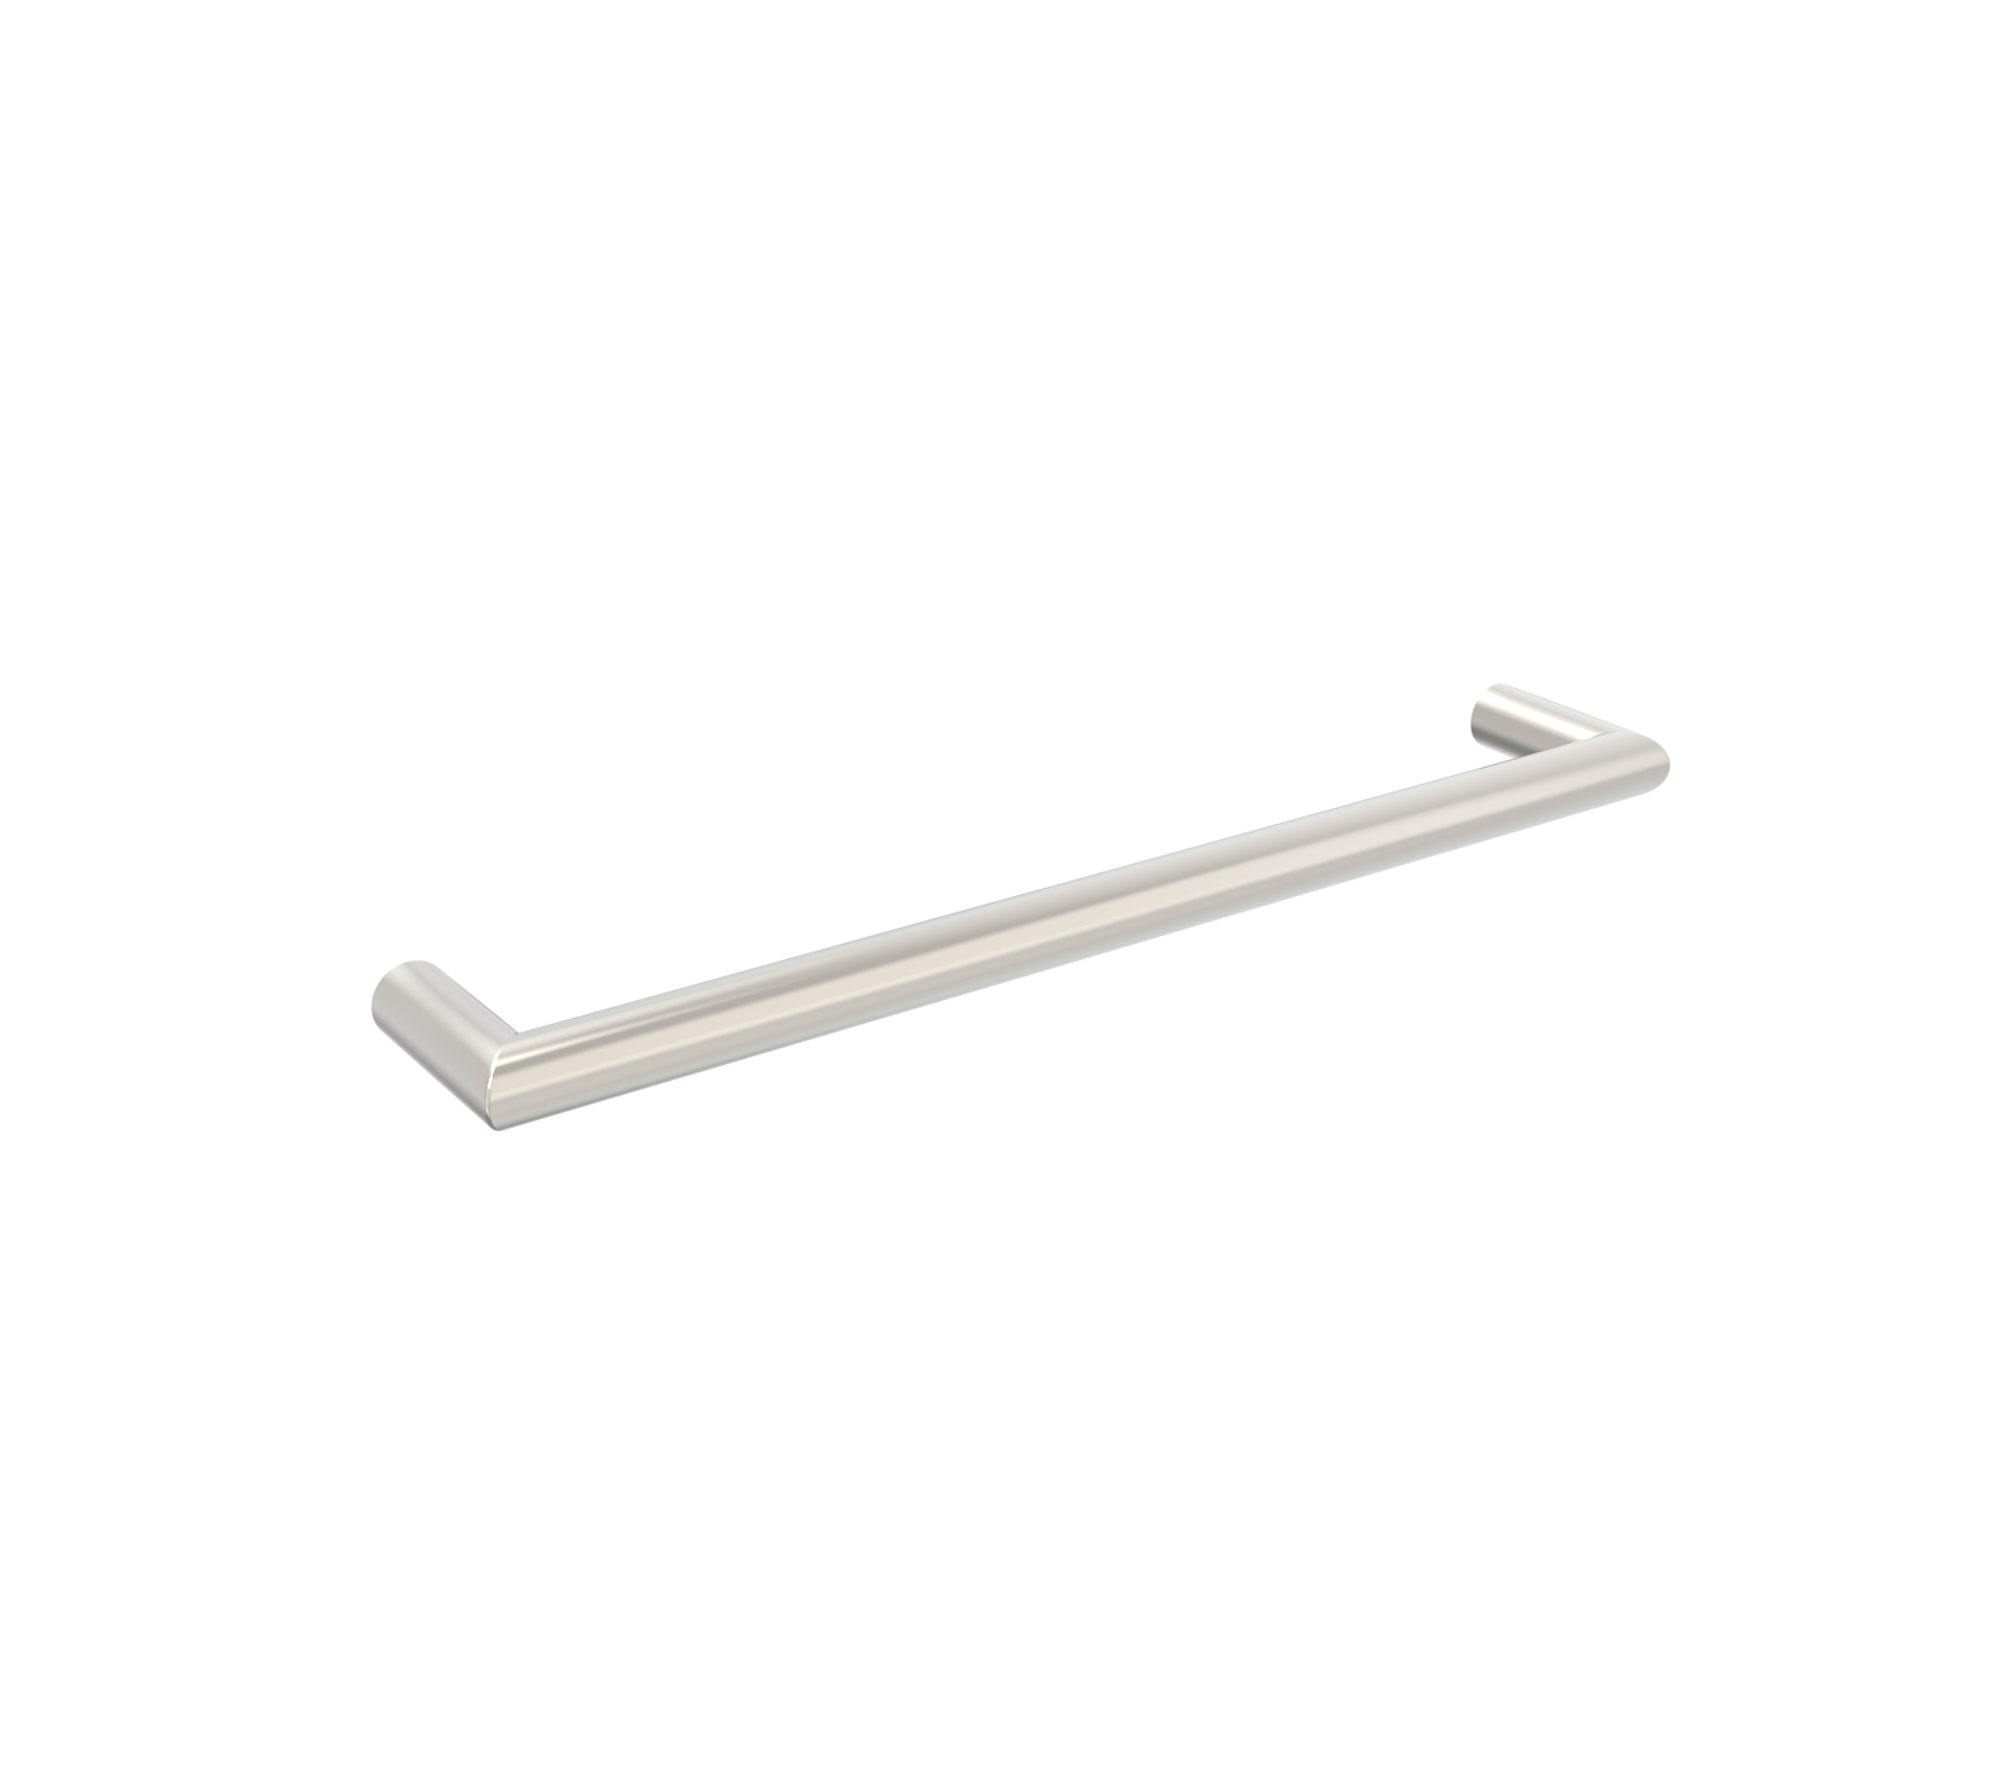 COS 600mm round electric towel rail - 12V - Brushed Nickel